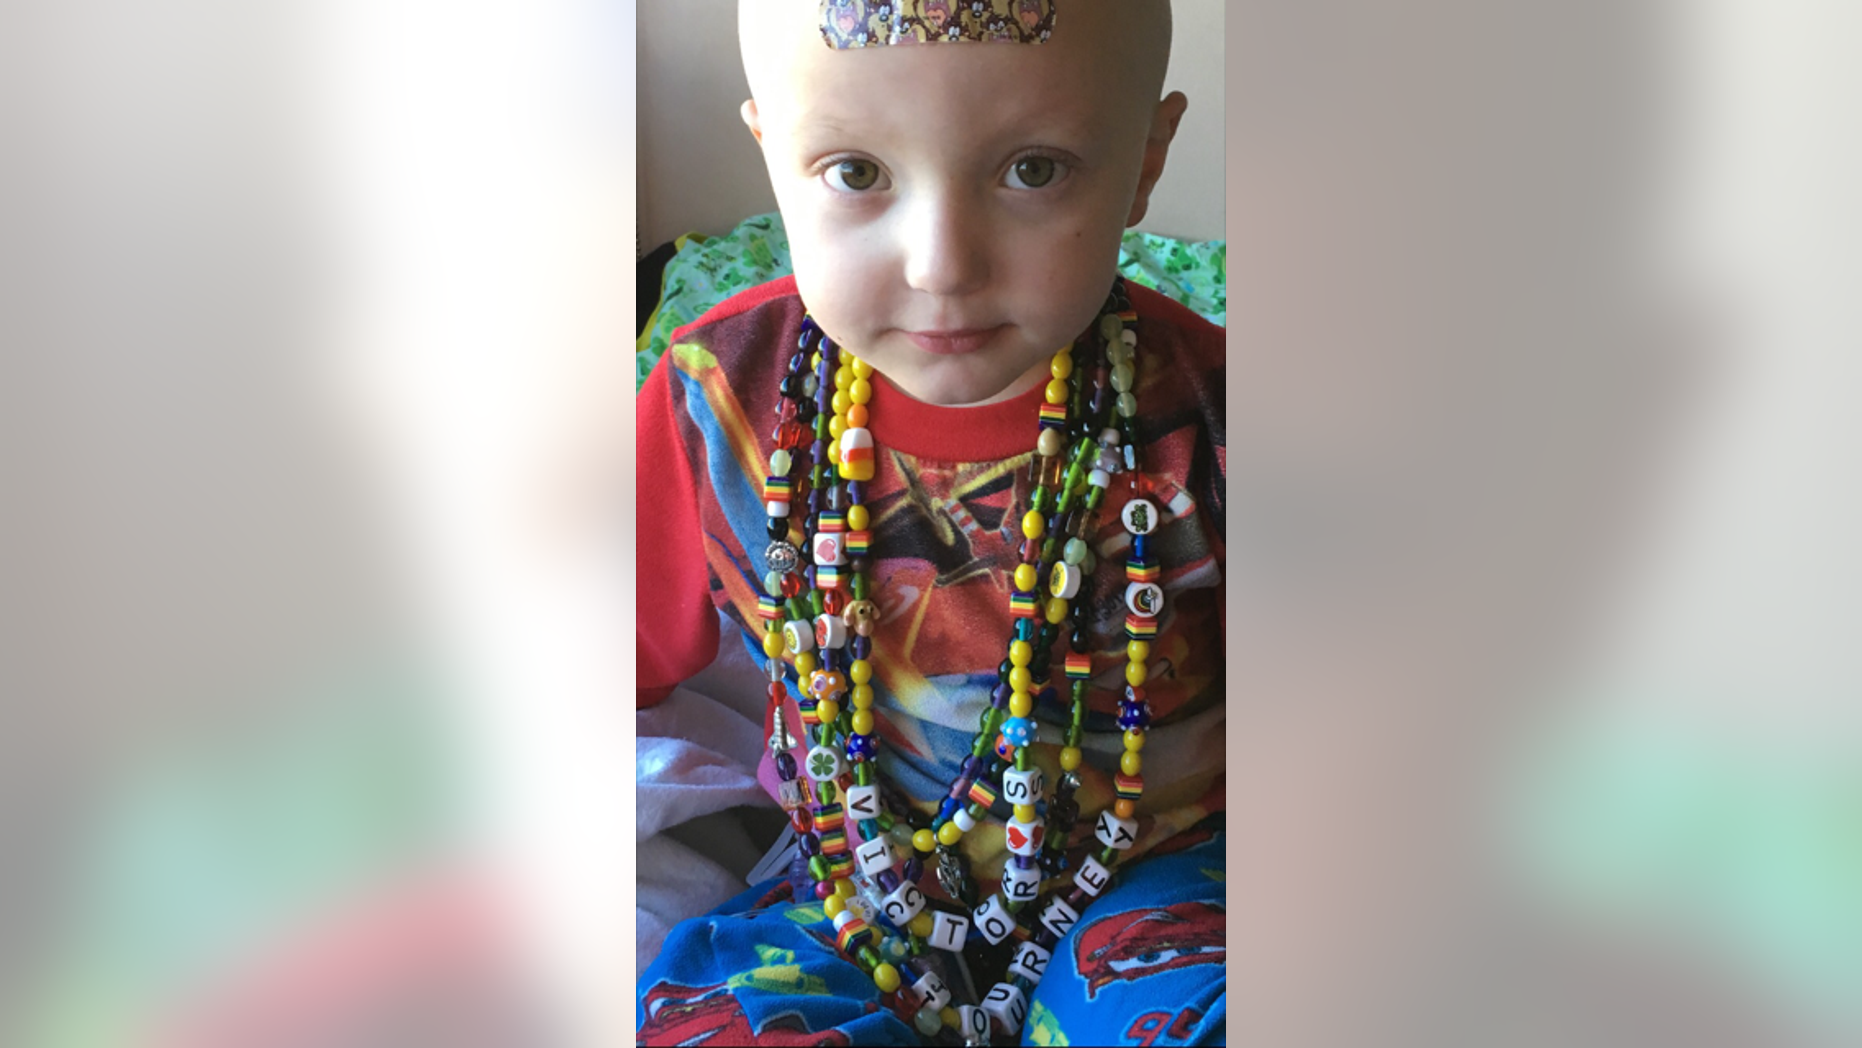 Beads Of Courage Program Helps Pediatric Cancer Patients Cope With 